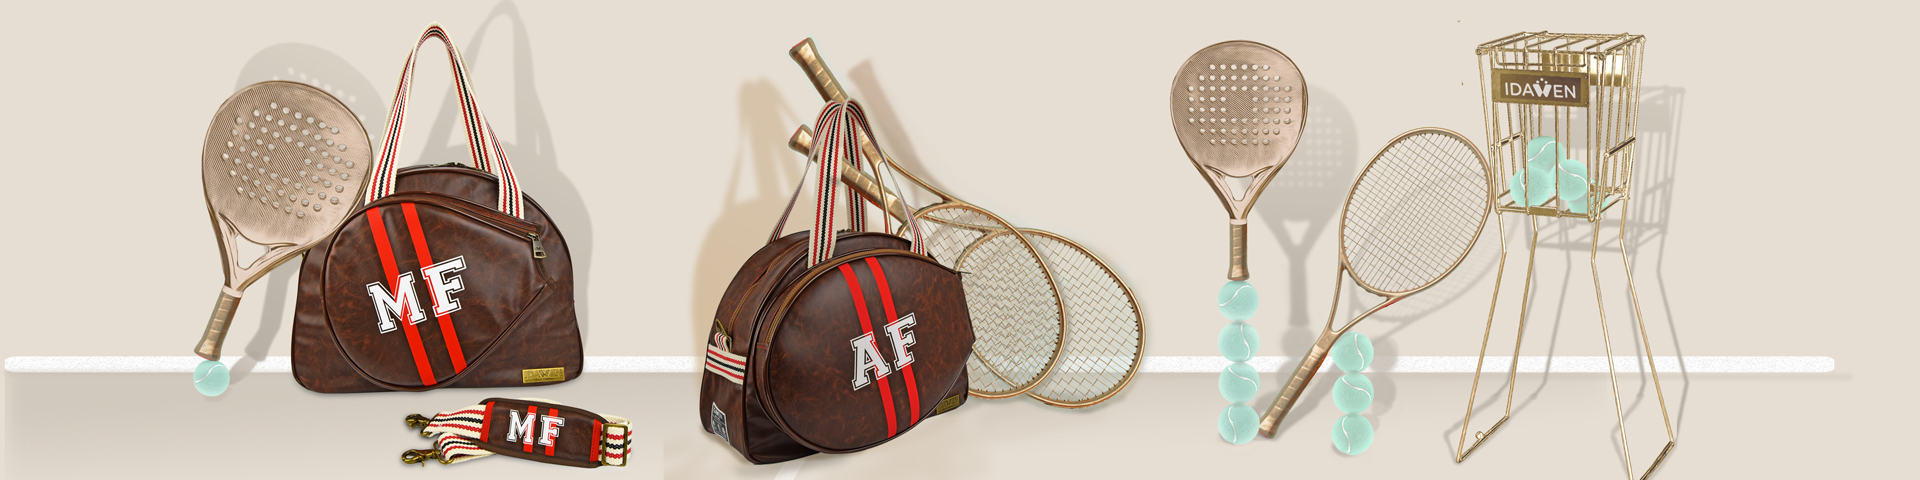 Tennis Gifts for Their Game - TENNIS EXPRESS BLOG